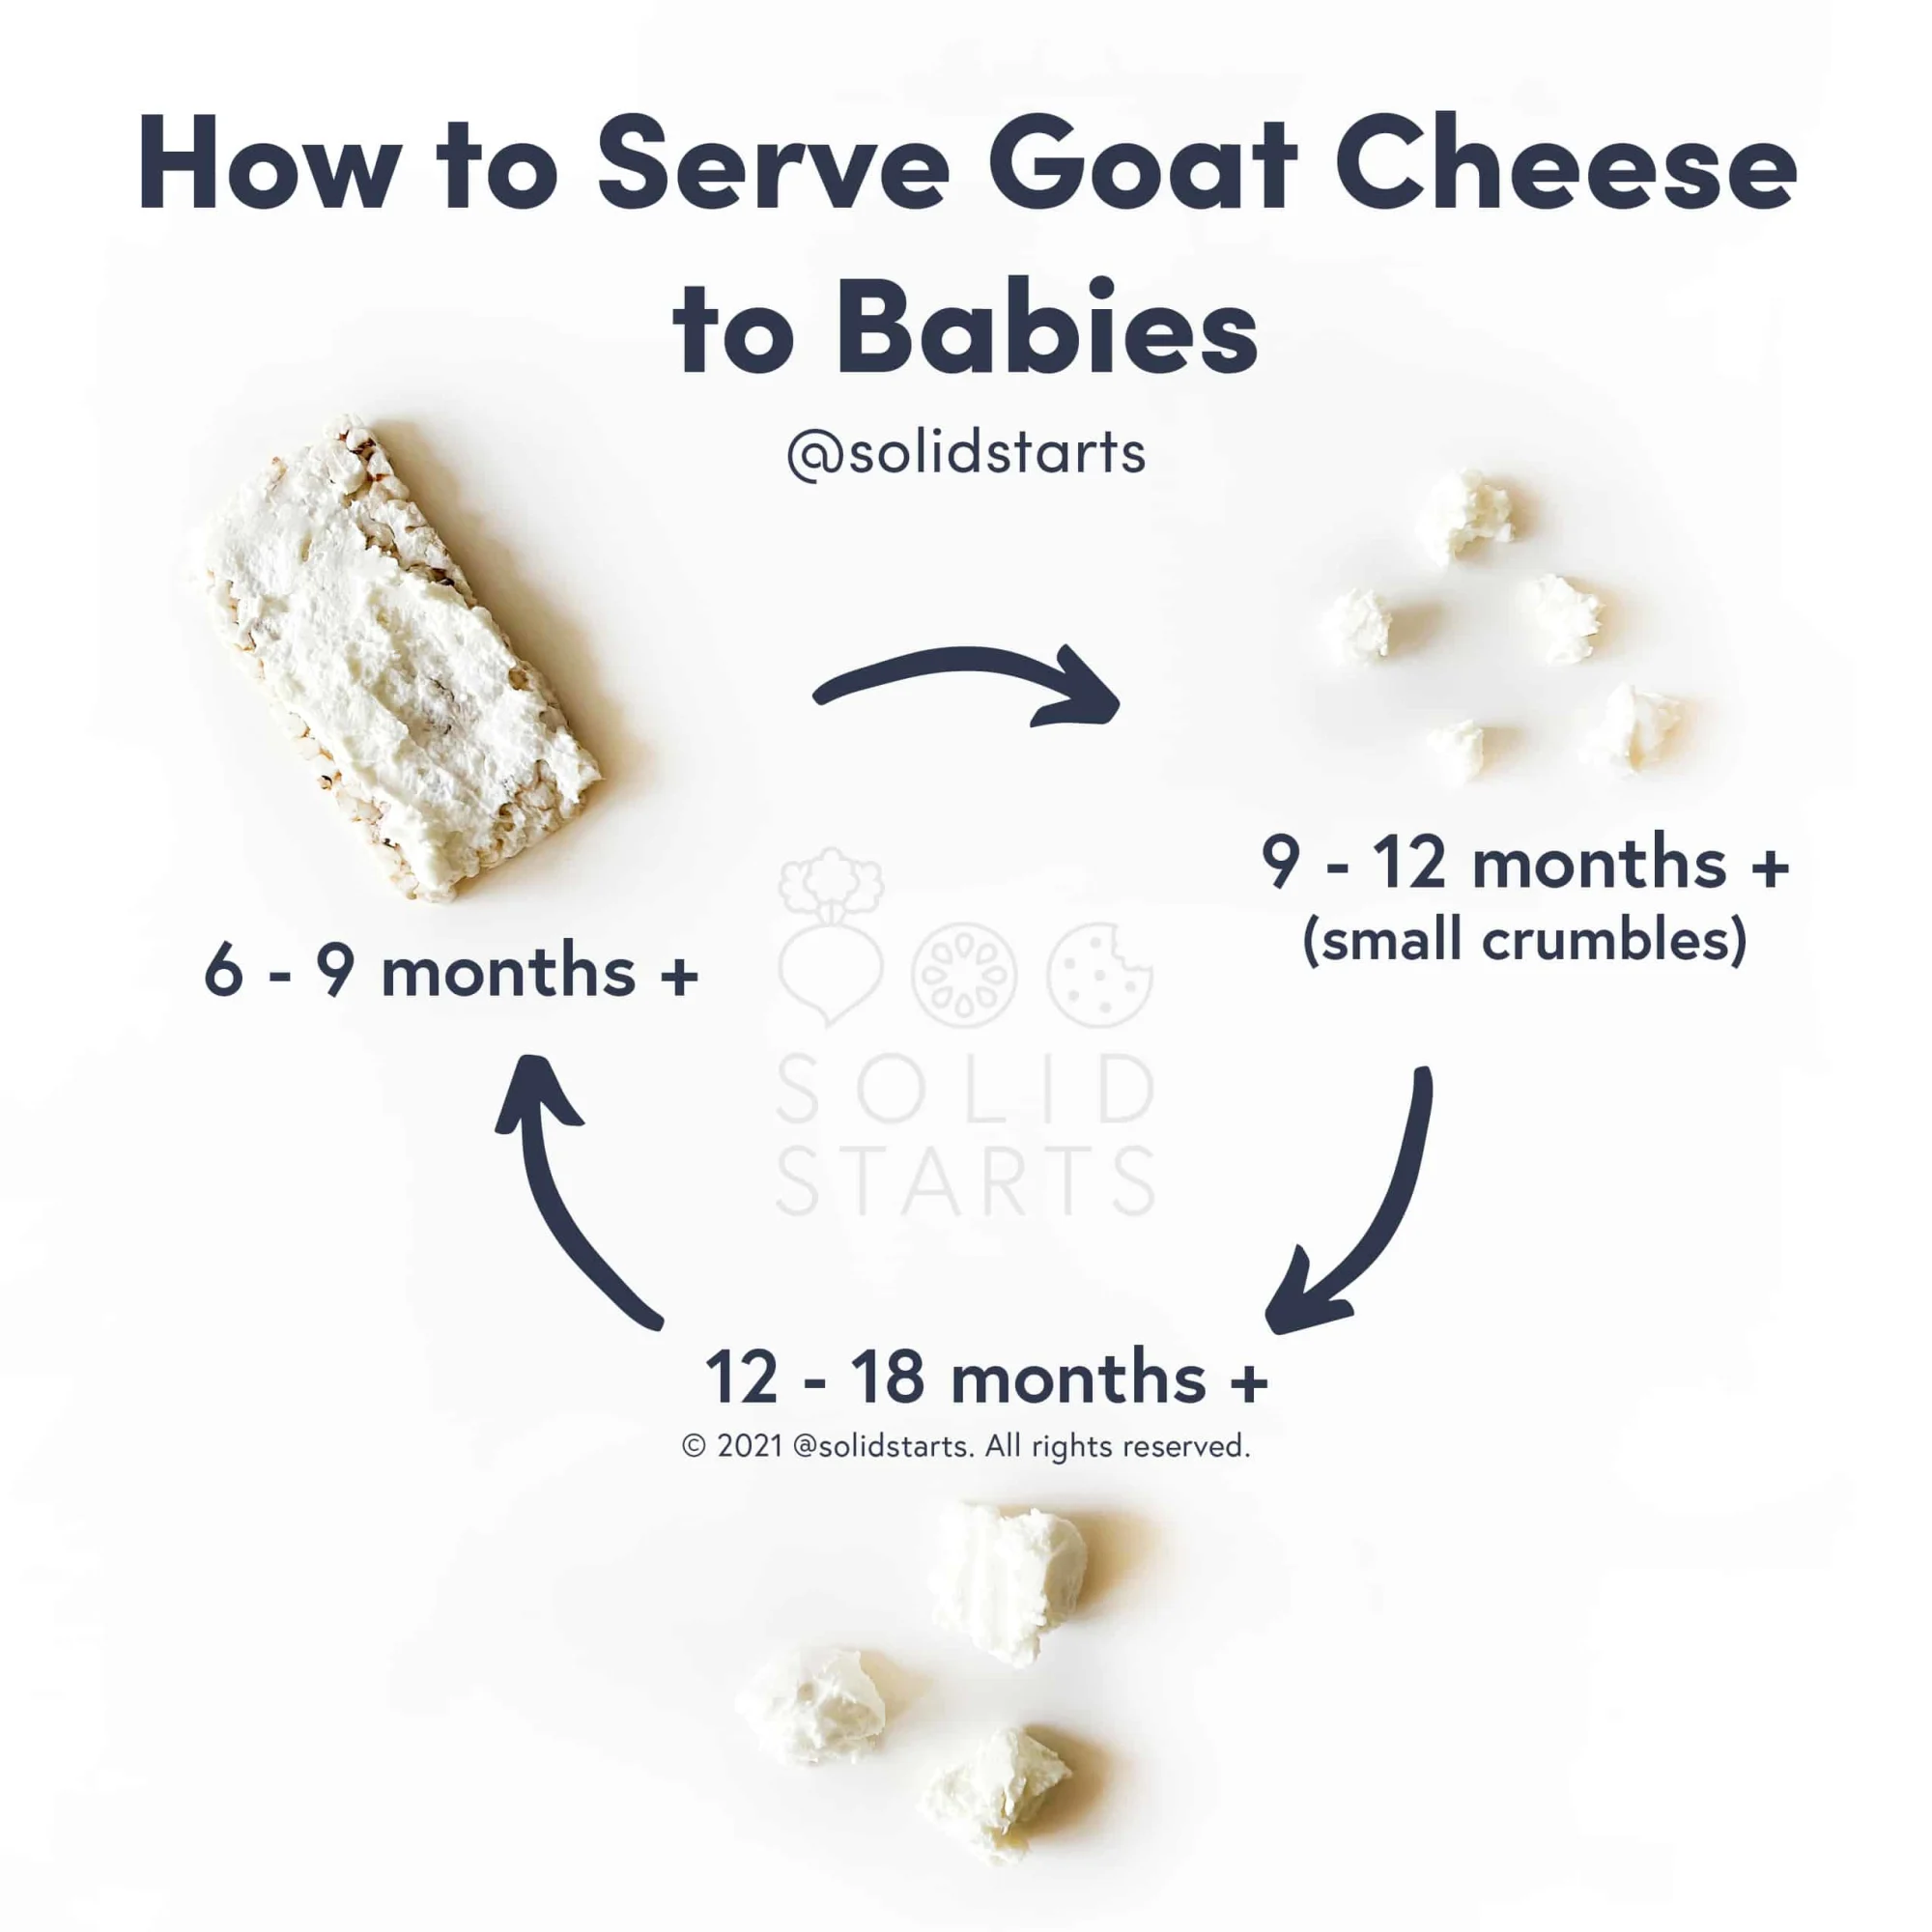 infographic titled "How to Serve Goat Cheese to Babies" showing images of goat cheese prepared for various ages. Cracker with goat cheese spread for 6 - 9 months+, small goat cheese crumbles for 9 - 12 months+, and larger goat cheese crumbles for 12 - 18 